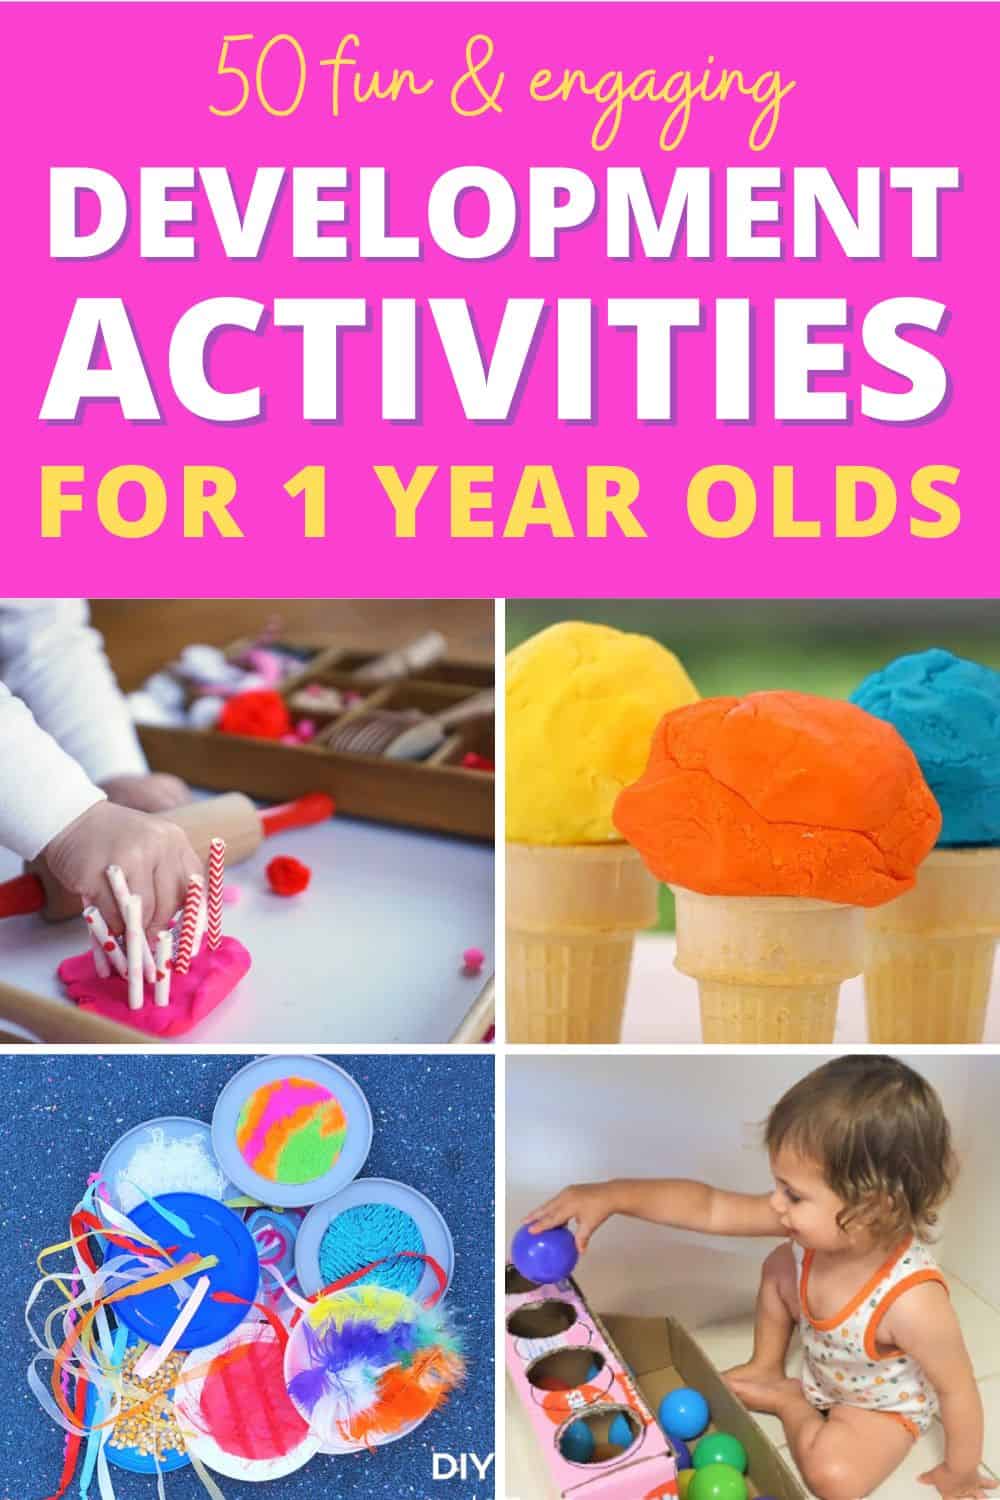 developmental activities for 1 year olds feature image